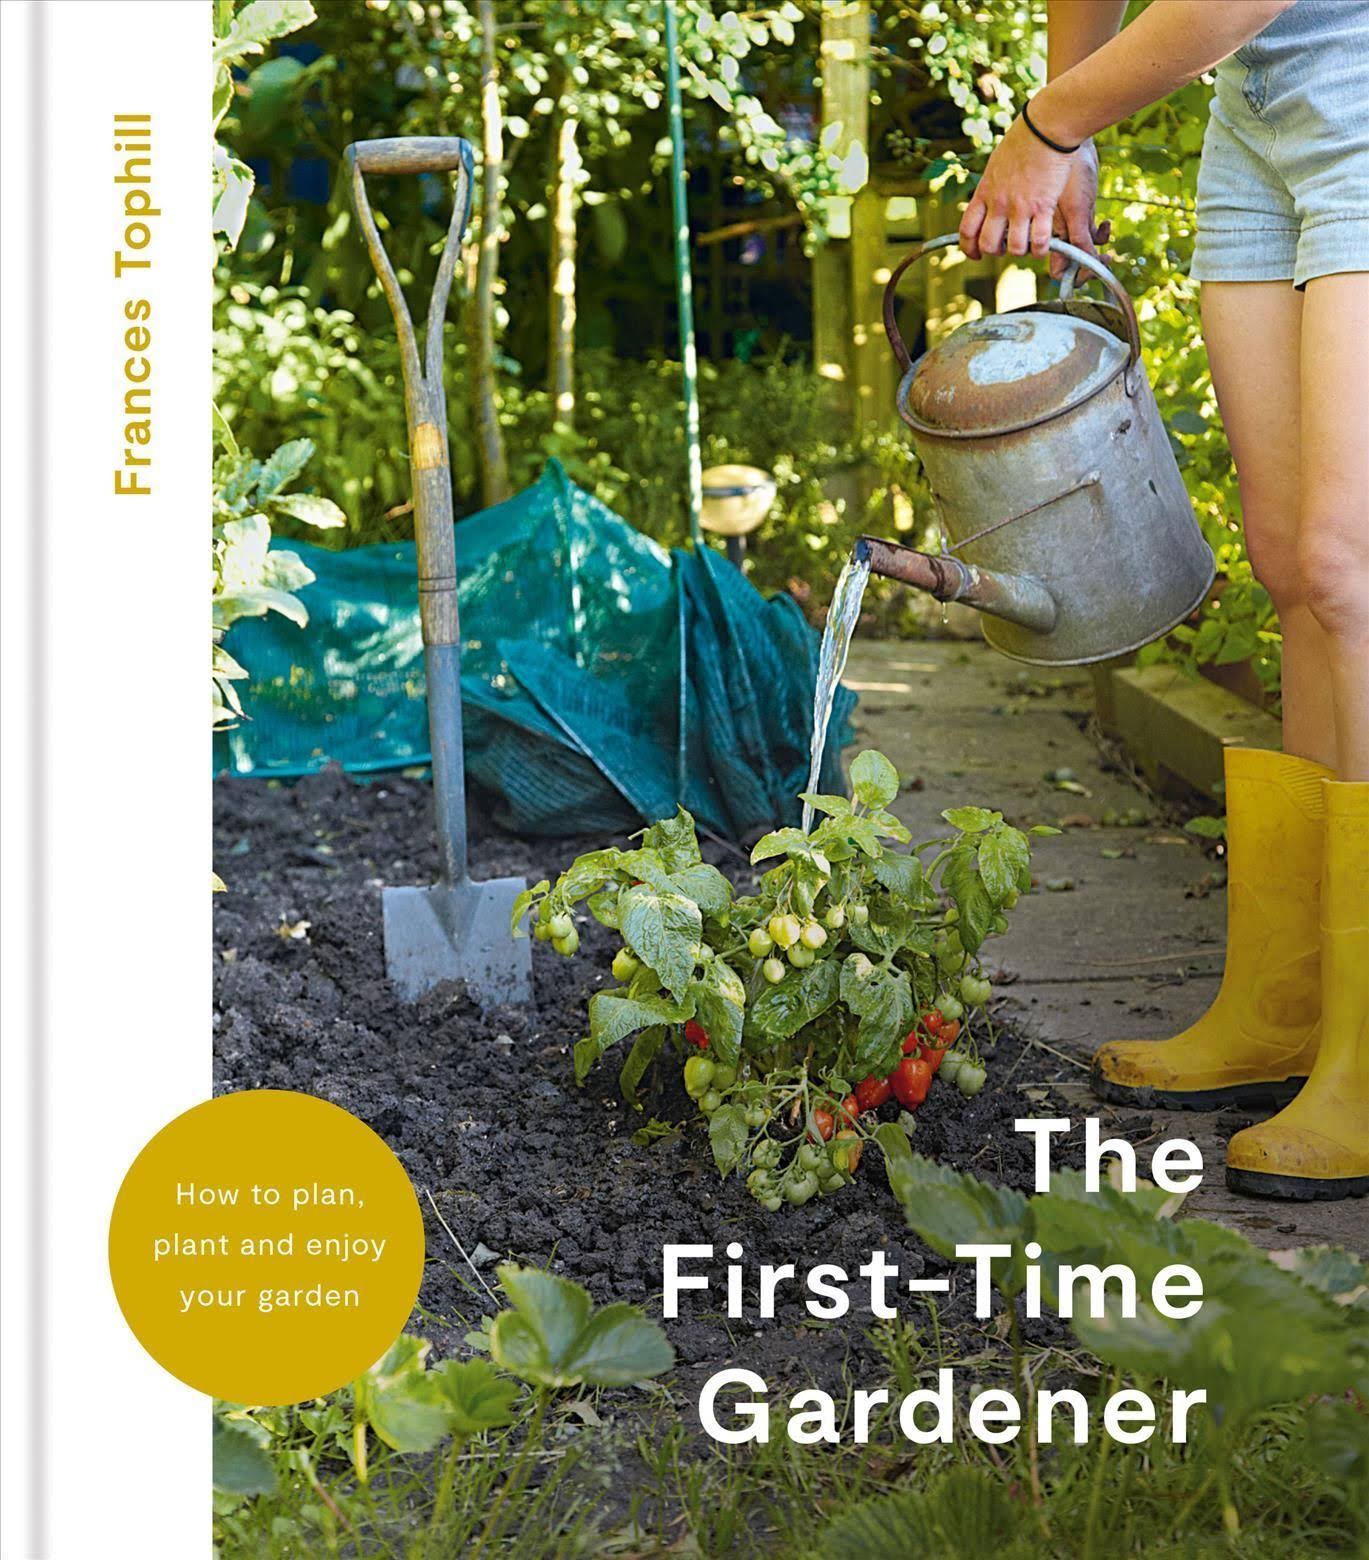 The First-Time Gardener by Frances Tophill